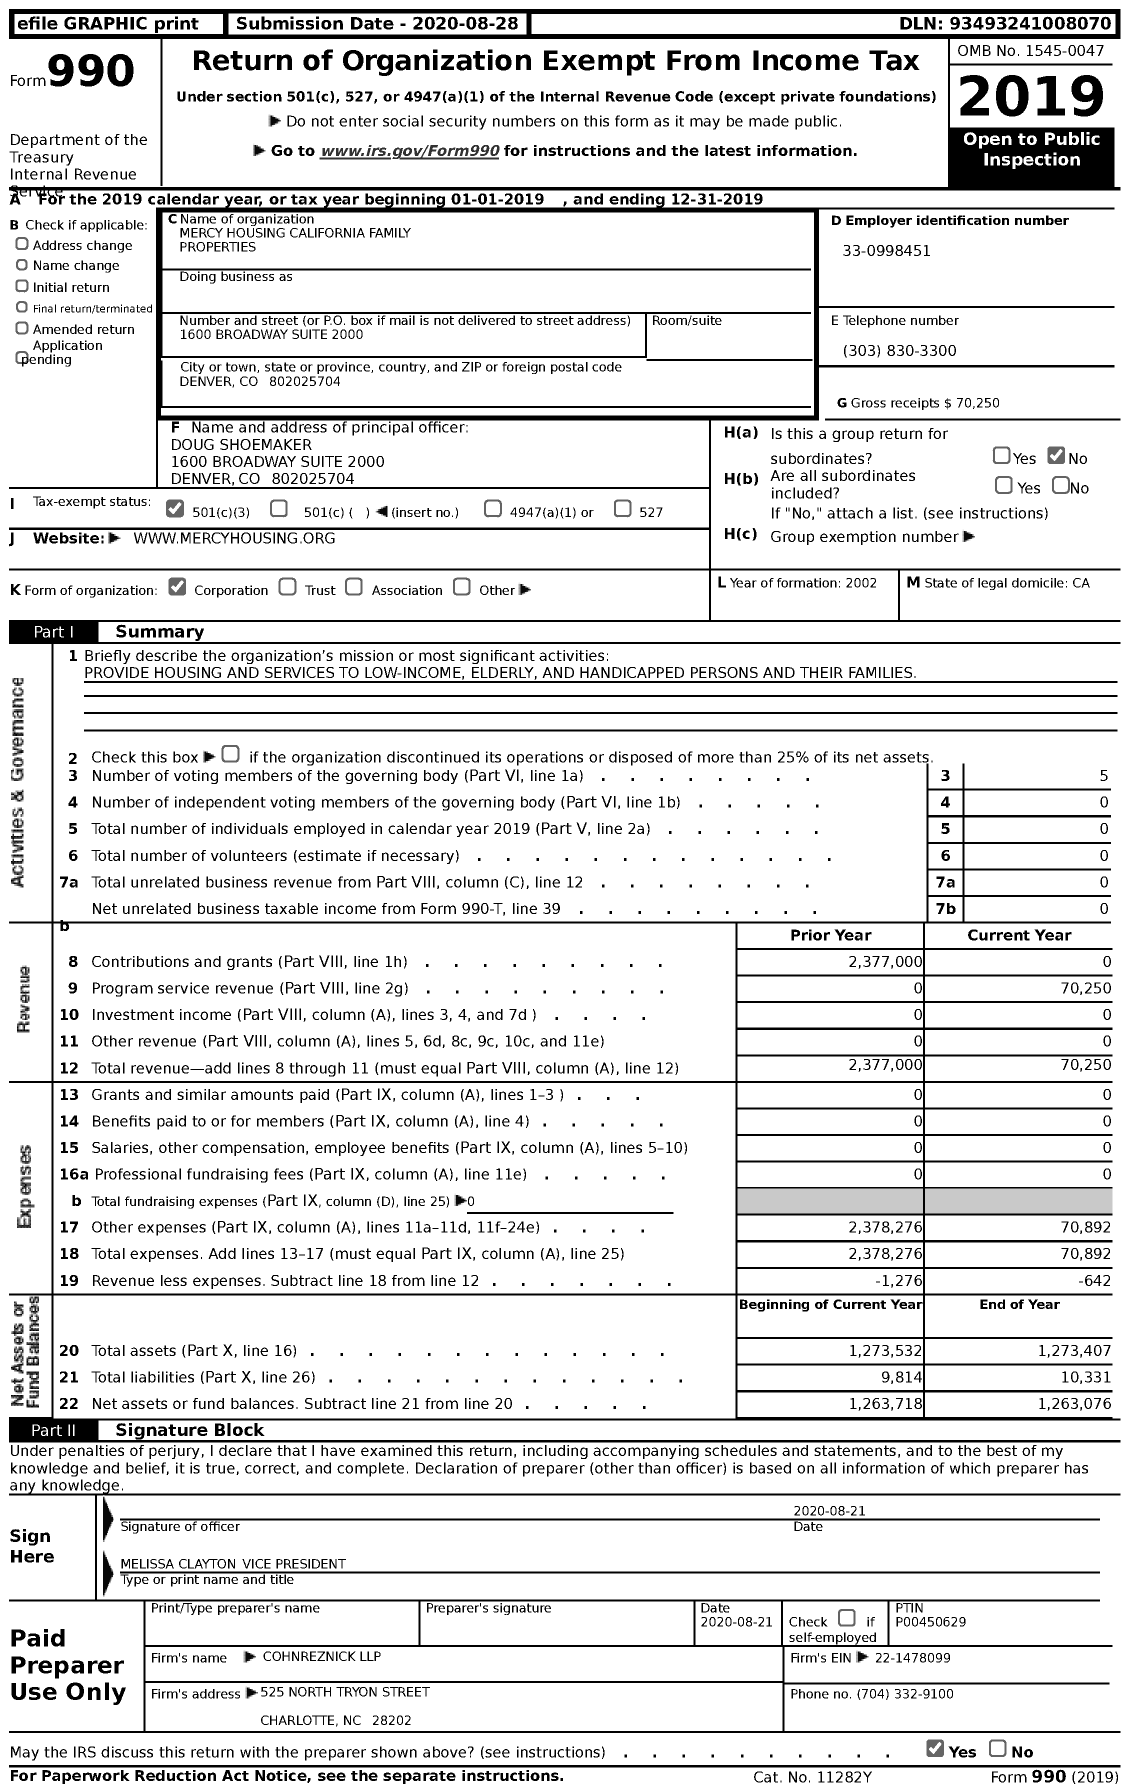 Image of first page of 2019 Form 990 for Mercy Housing California Family Properties